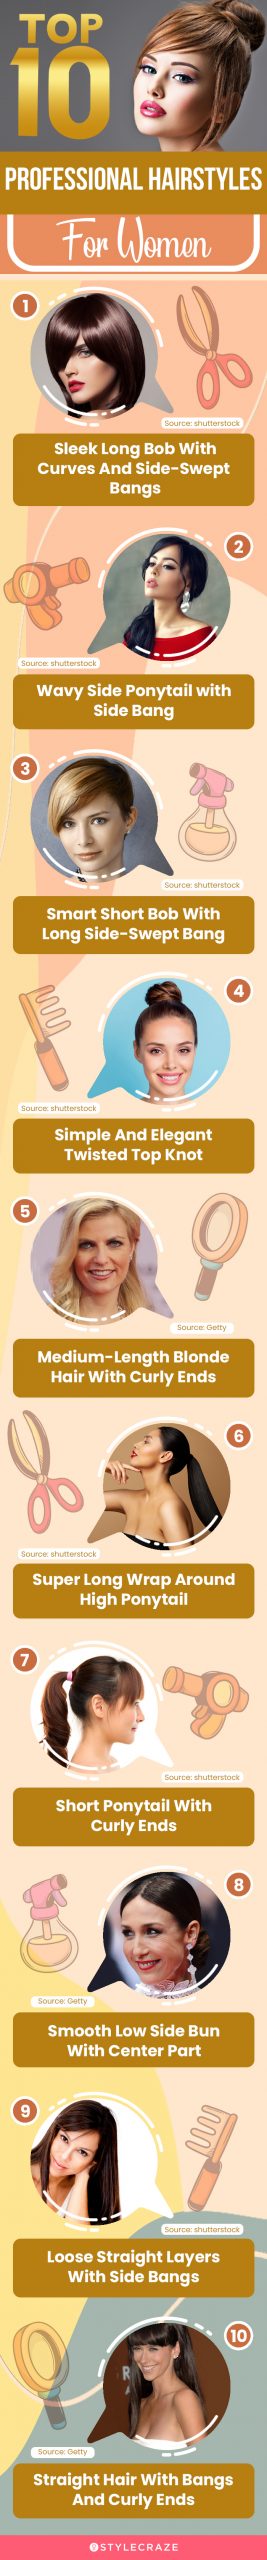 top 10 professional hairstyles for women [infographic]